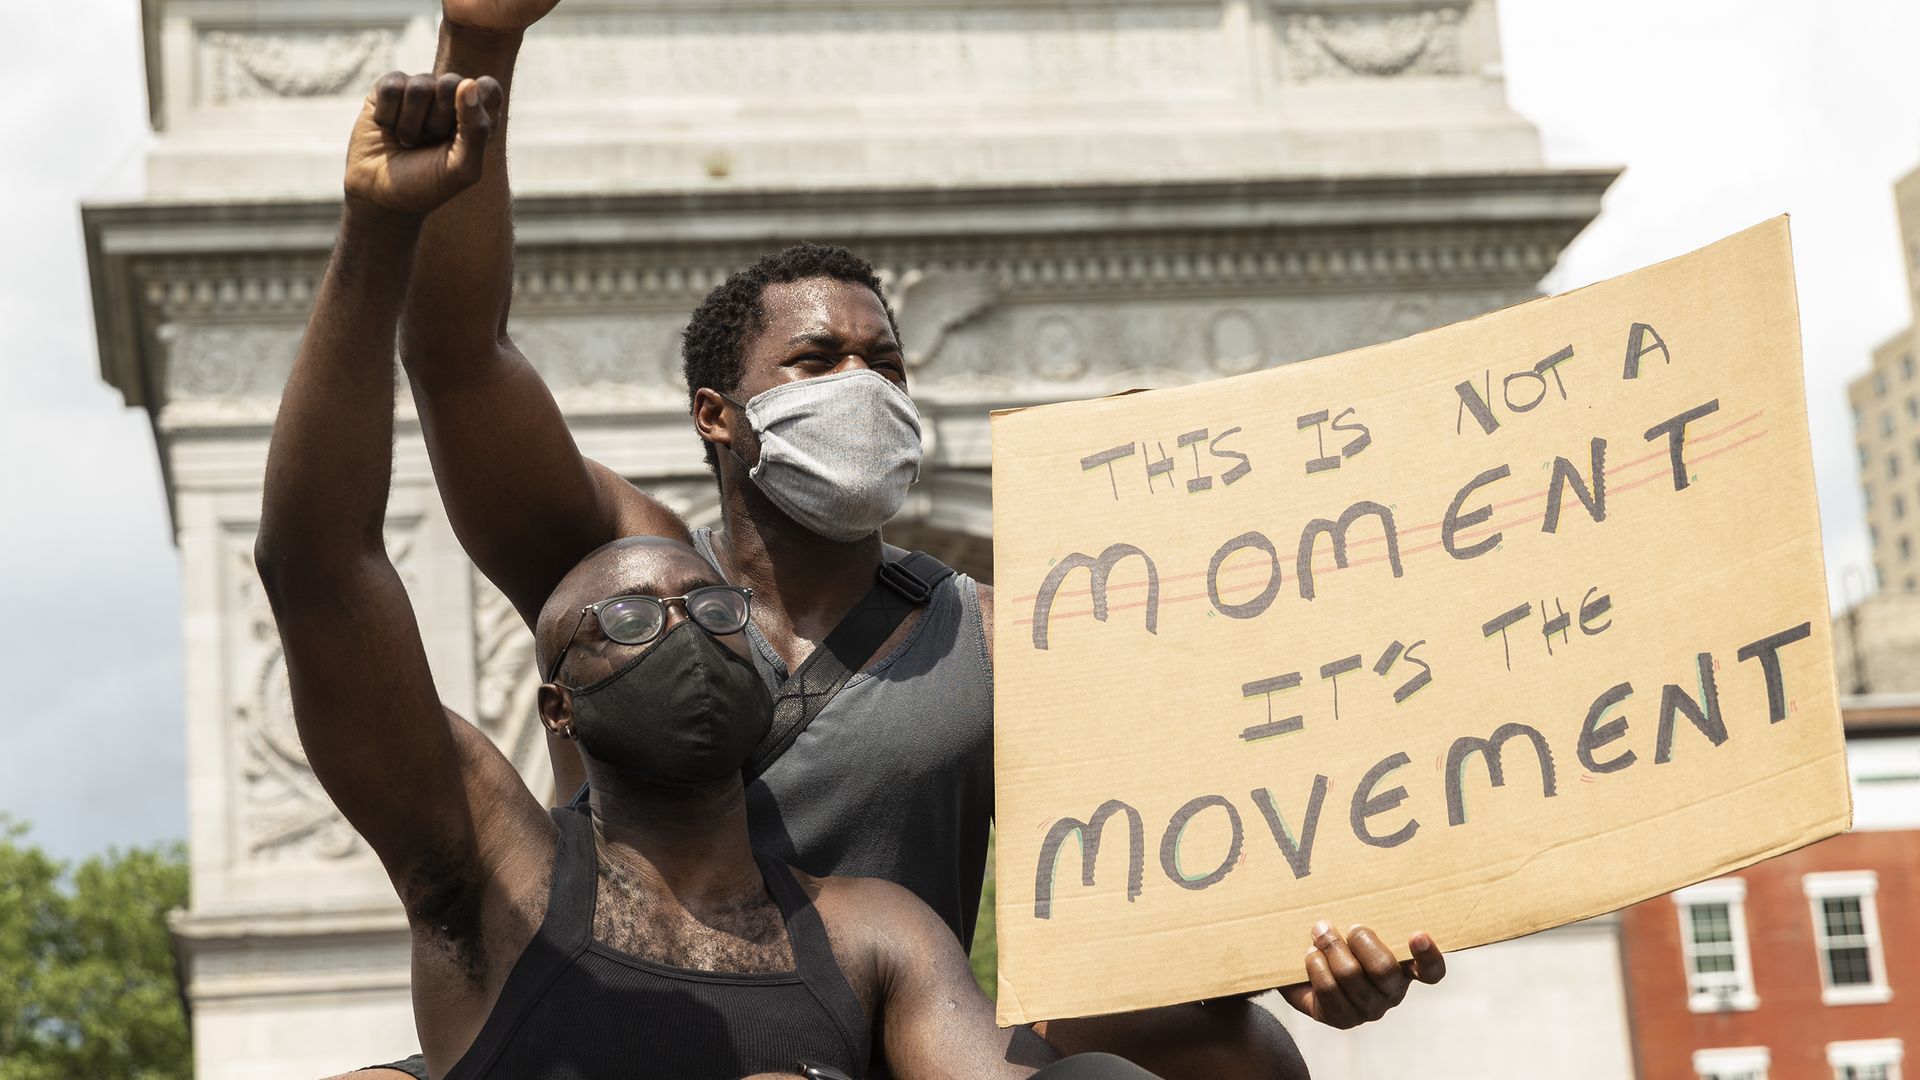 Photo of two Black protesters raising their fists in the air as one holds a sign that says "This is not a moment. It's the movement."